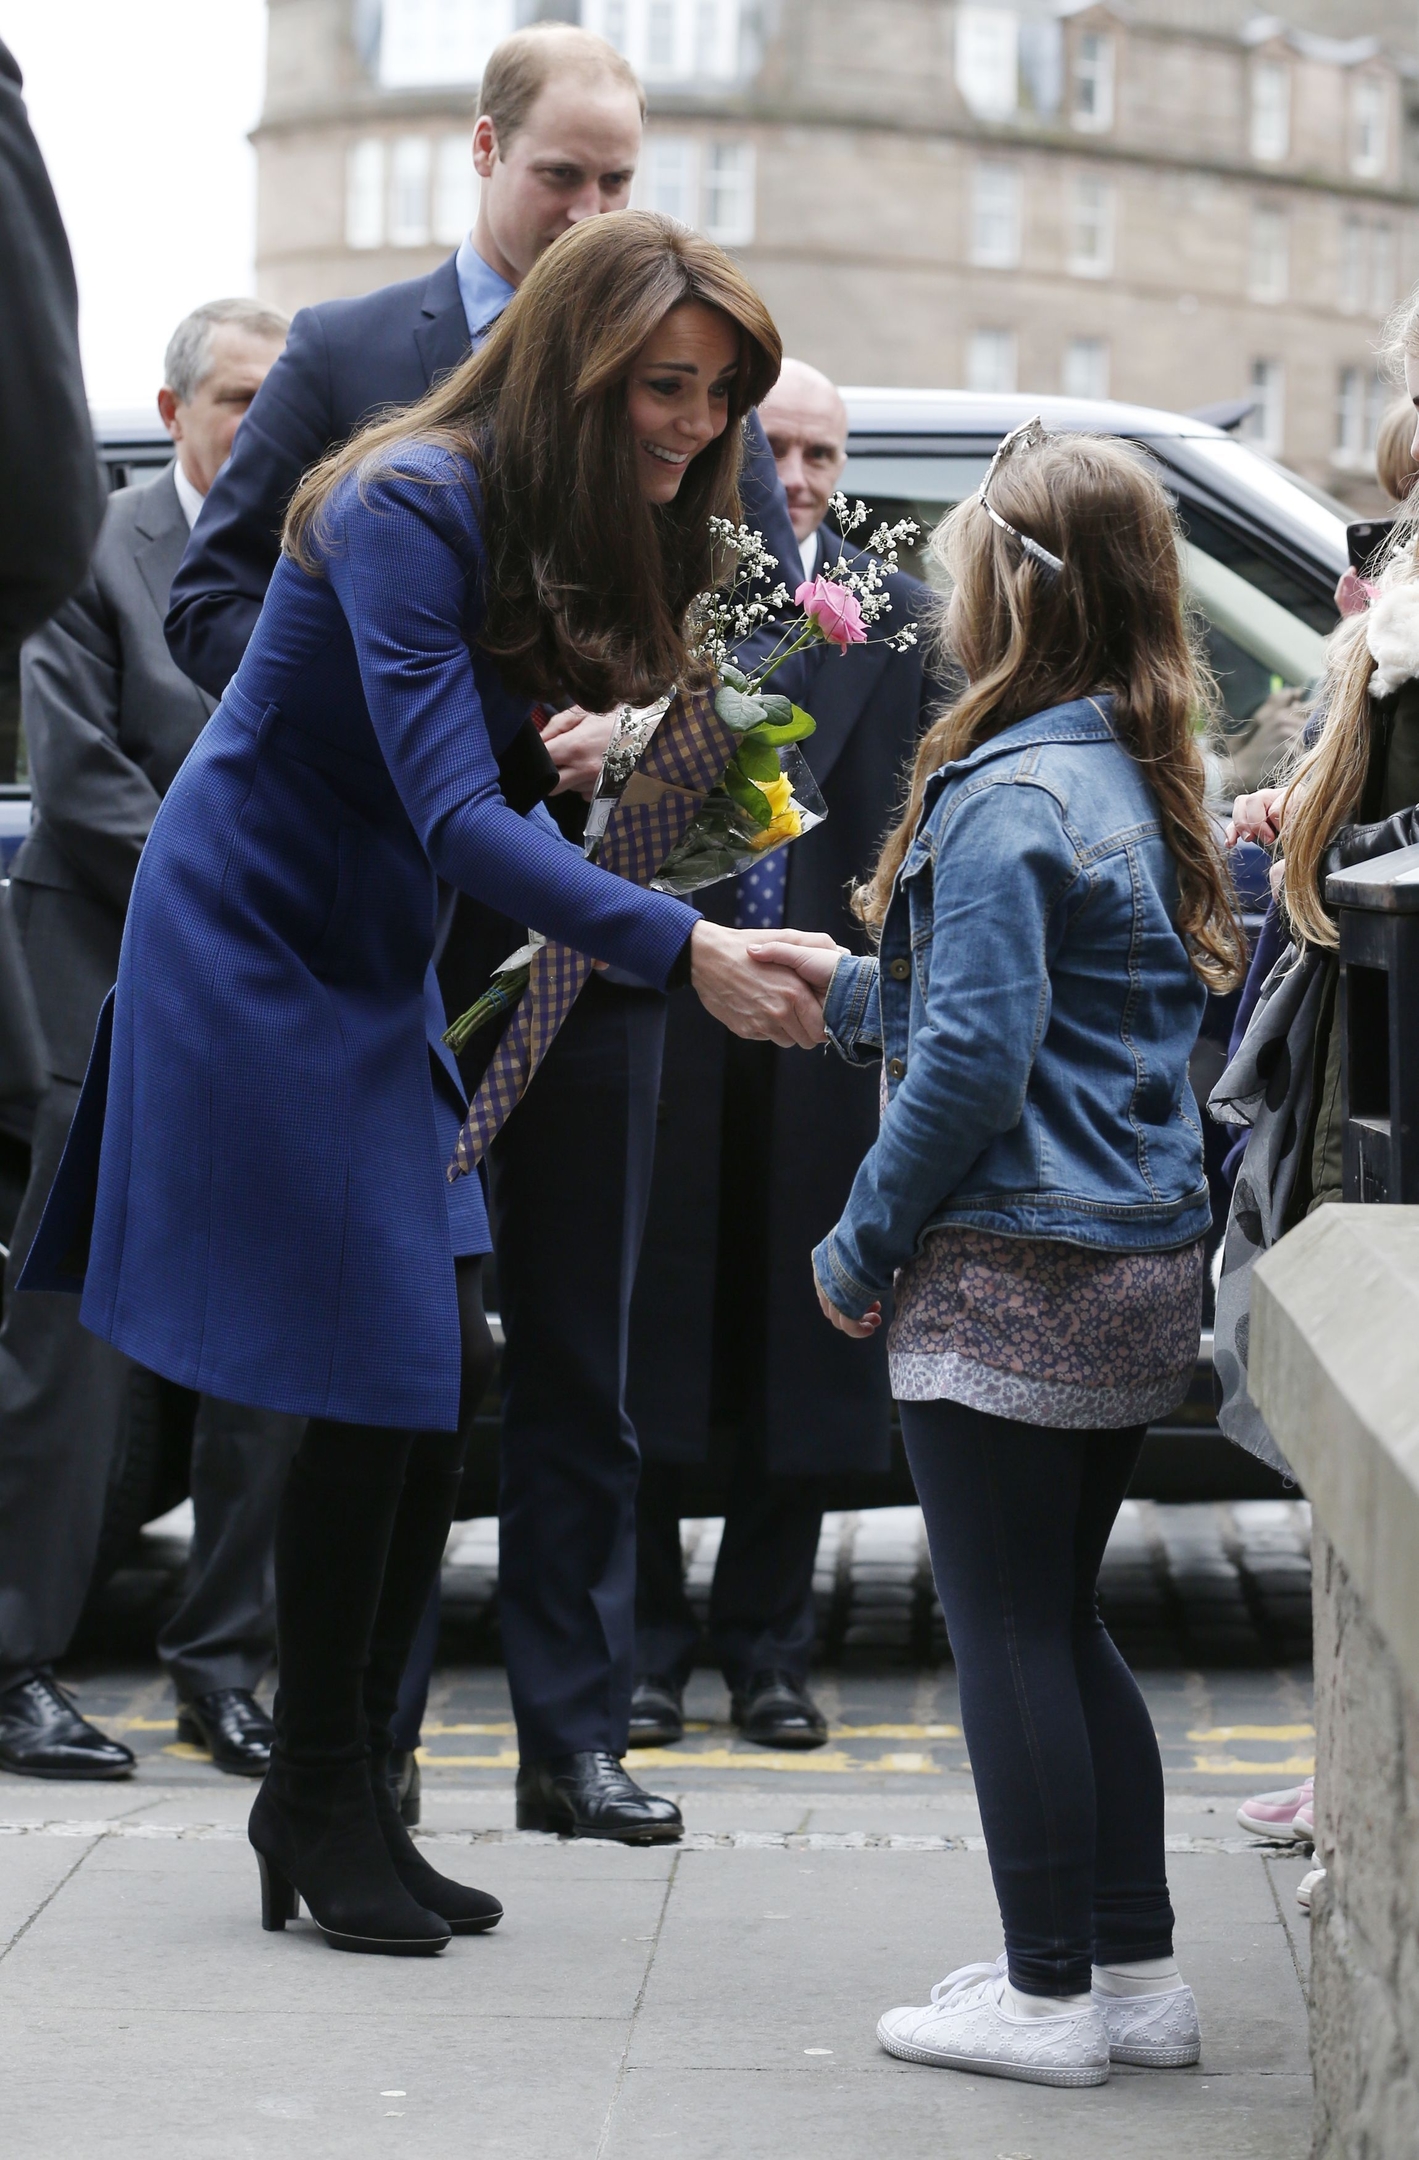 The Duke and Duchess of Cambridge arrive for the visit to The Corner, where they participated in an anti-bullying workshop as part of their visit to Dundee 